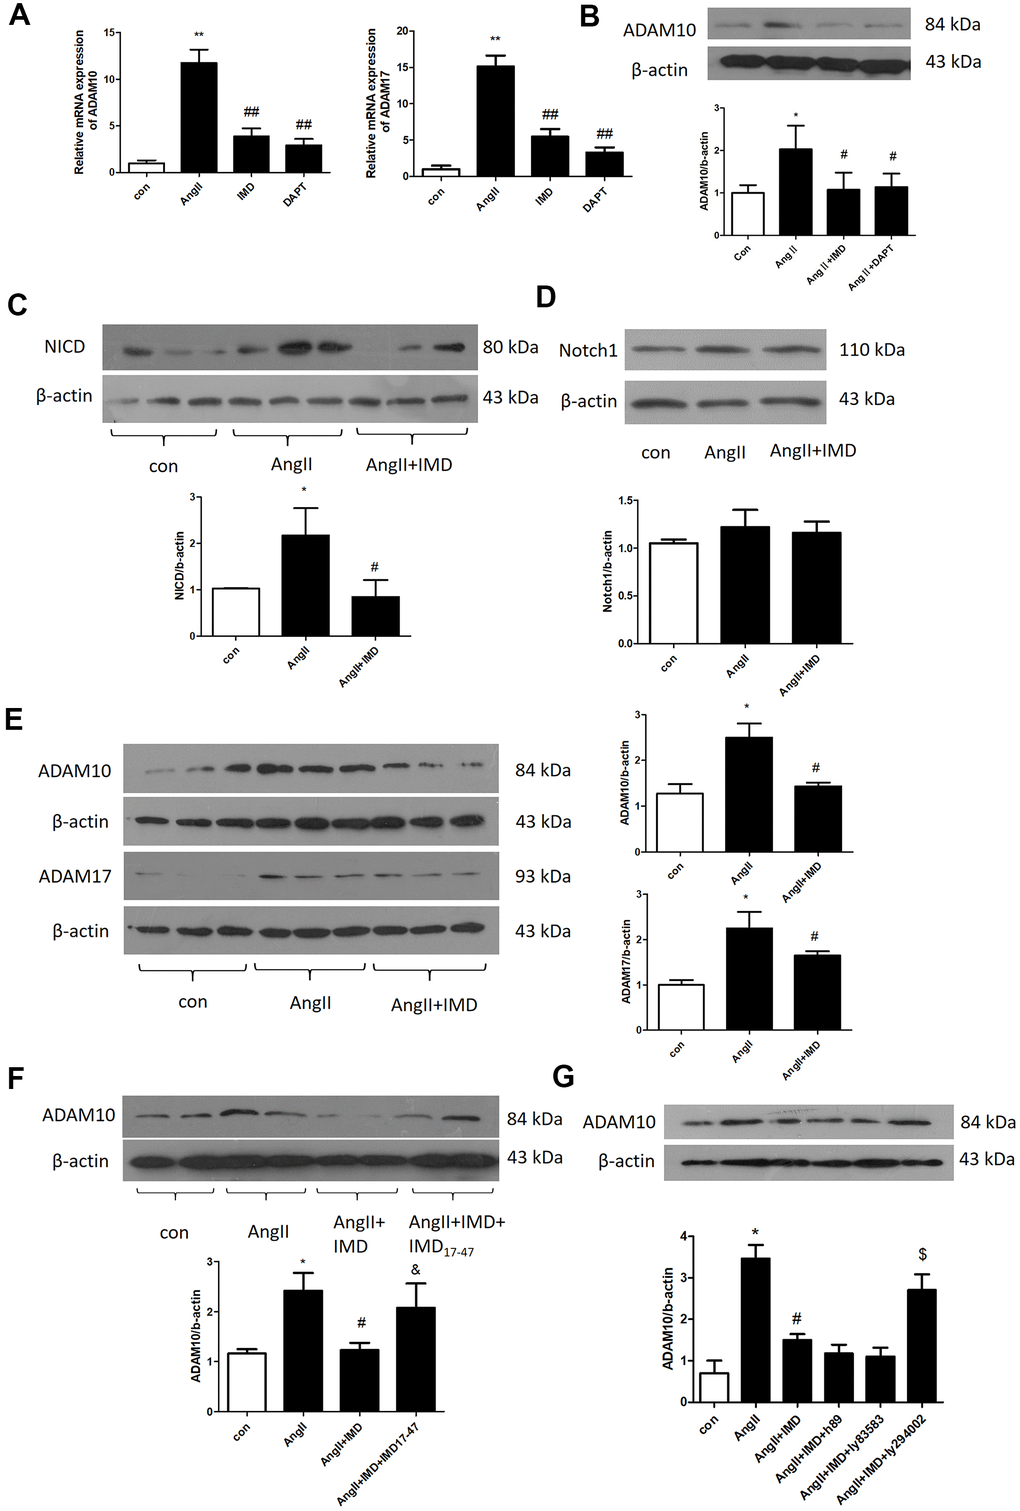 IMD inhibited Notch1 signaling activation by ADAM10. (A) Quantitative real-time PCR analysis of mRNA levels of ADAM10 and ADAM17 in aortas of Control, AngII, AngII+IMD and AngII+DAPT in mice. (B) Western blot analysis of protein level of ADAM10 in aortas of Control, AngII, AngII+IMD and AngII+DAPT mice. Western blot analysis of protein levels of (C, D) NICD, the intracellular fragment of Notch1 and the full length Notch1 receptor and (E) ADAM10 and ADAM17 in AngII-induced macrophage cell line Raw264.7. n=3, Data are mean ± SD. *PP#P##PF) Western blot analysis of protein level of ADAM10 in AngII-induced macrophage cell line Raw264.7. Except for the first 3 groups, IMD receptor blocker IMD17-47 group was added. n=3, Data are mean ± SD. *P#P&PG) Western blot analysis of protein level of ADAM10 in AngII-induced macrophage cell line Raw264.7. Except for the first 3 groups, cAMP/PKA inhibitor H89, cGMP/PKG inhibitor Ly83583 and PI3K/Akt inhibitor LY294002 were added. n=3, Data are mean ± SD. *P#P$P